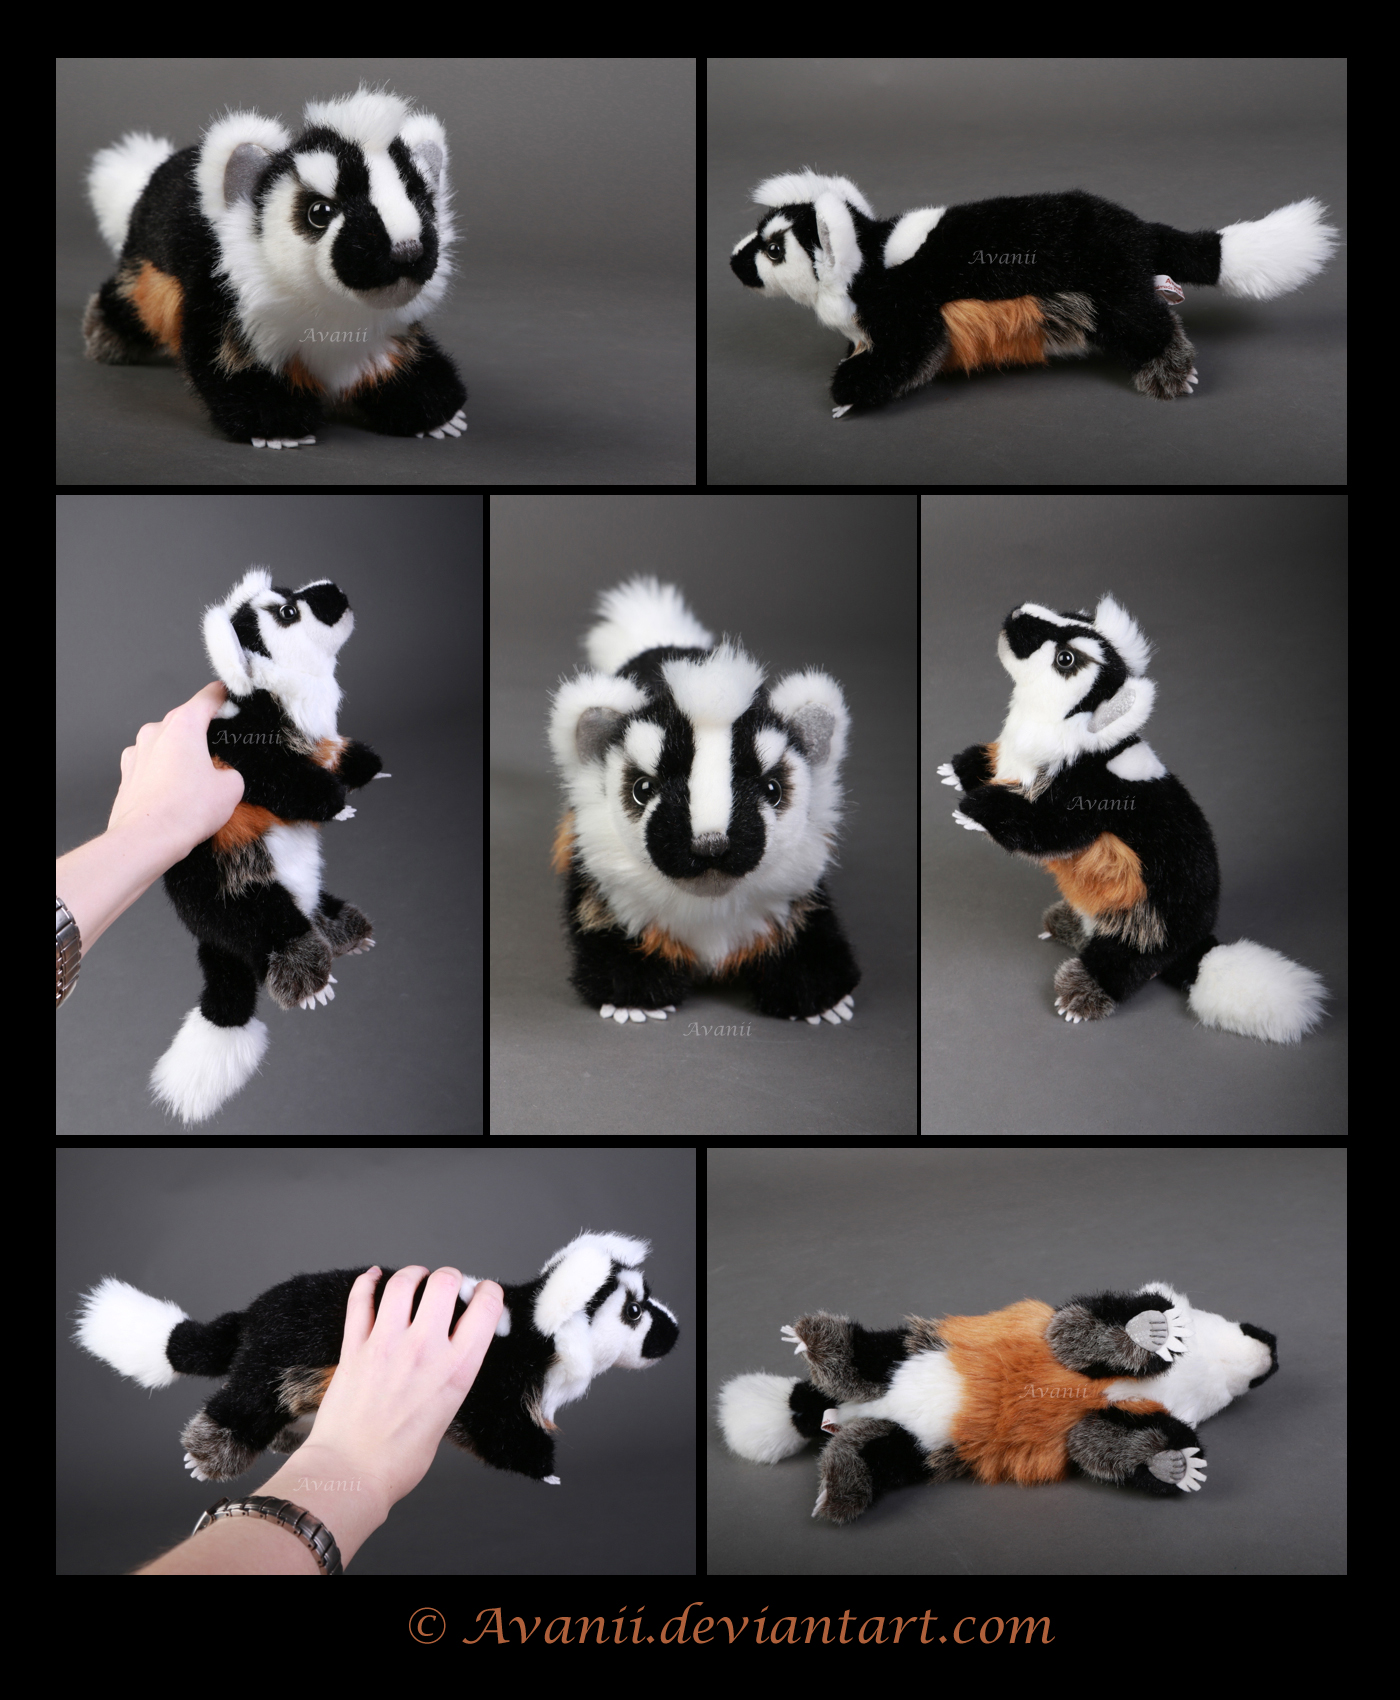 Plushie Commission: Evan the American Badger